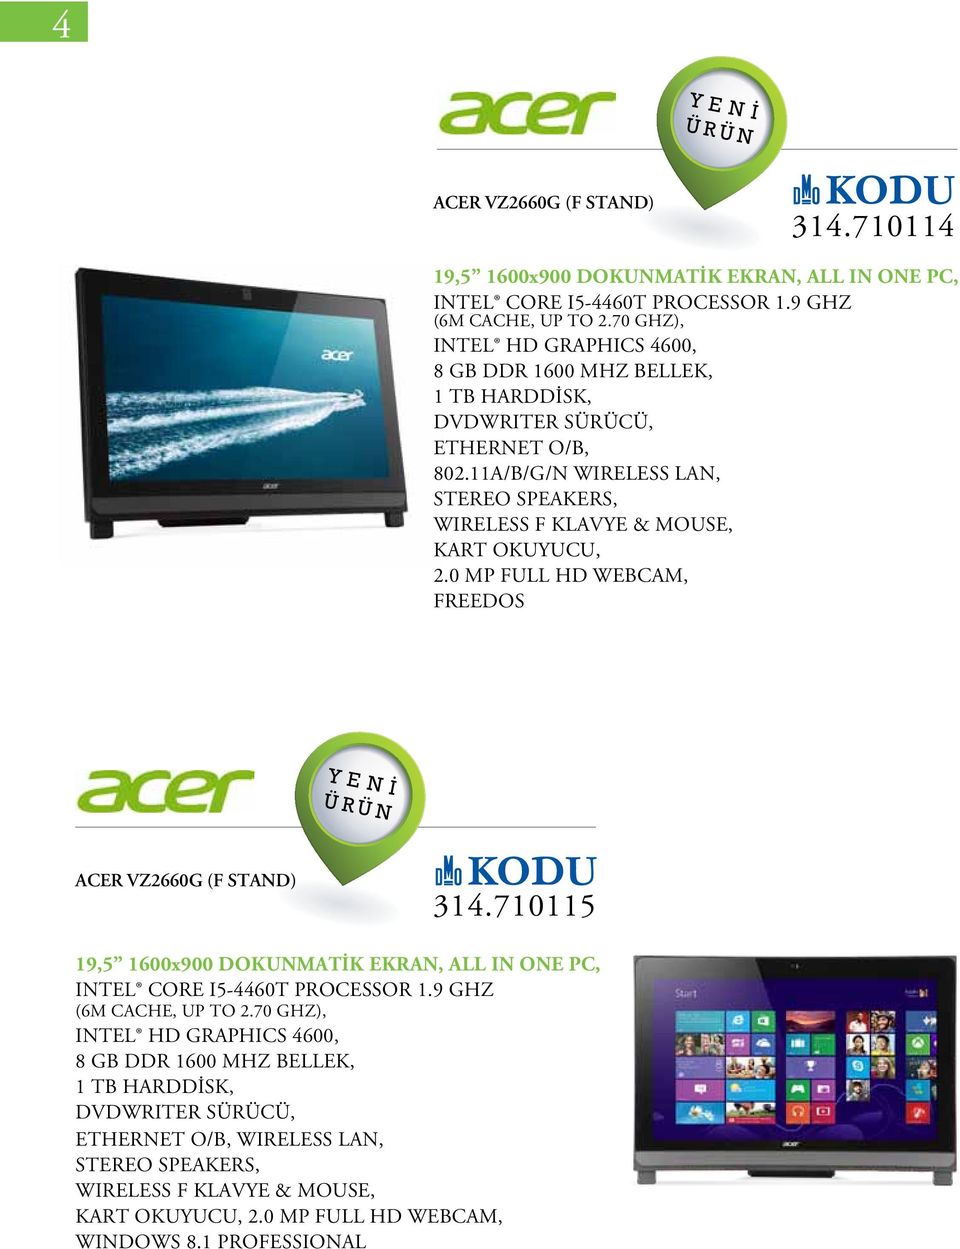 0 MP FULL HD WEBCAM, FREEDOS ACER VZ2660G (F STAND) 314.710115 19,5 1600x900 DOKUNMATİK EKRAN, ALL IN ONE PC, INTEL CORE I5-4460T PROCESSOR 1.